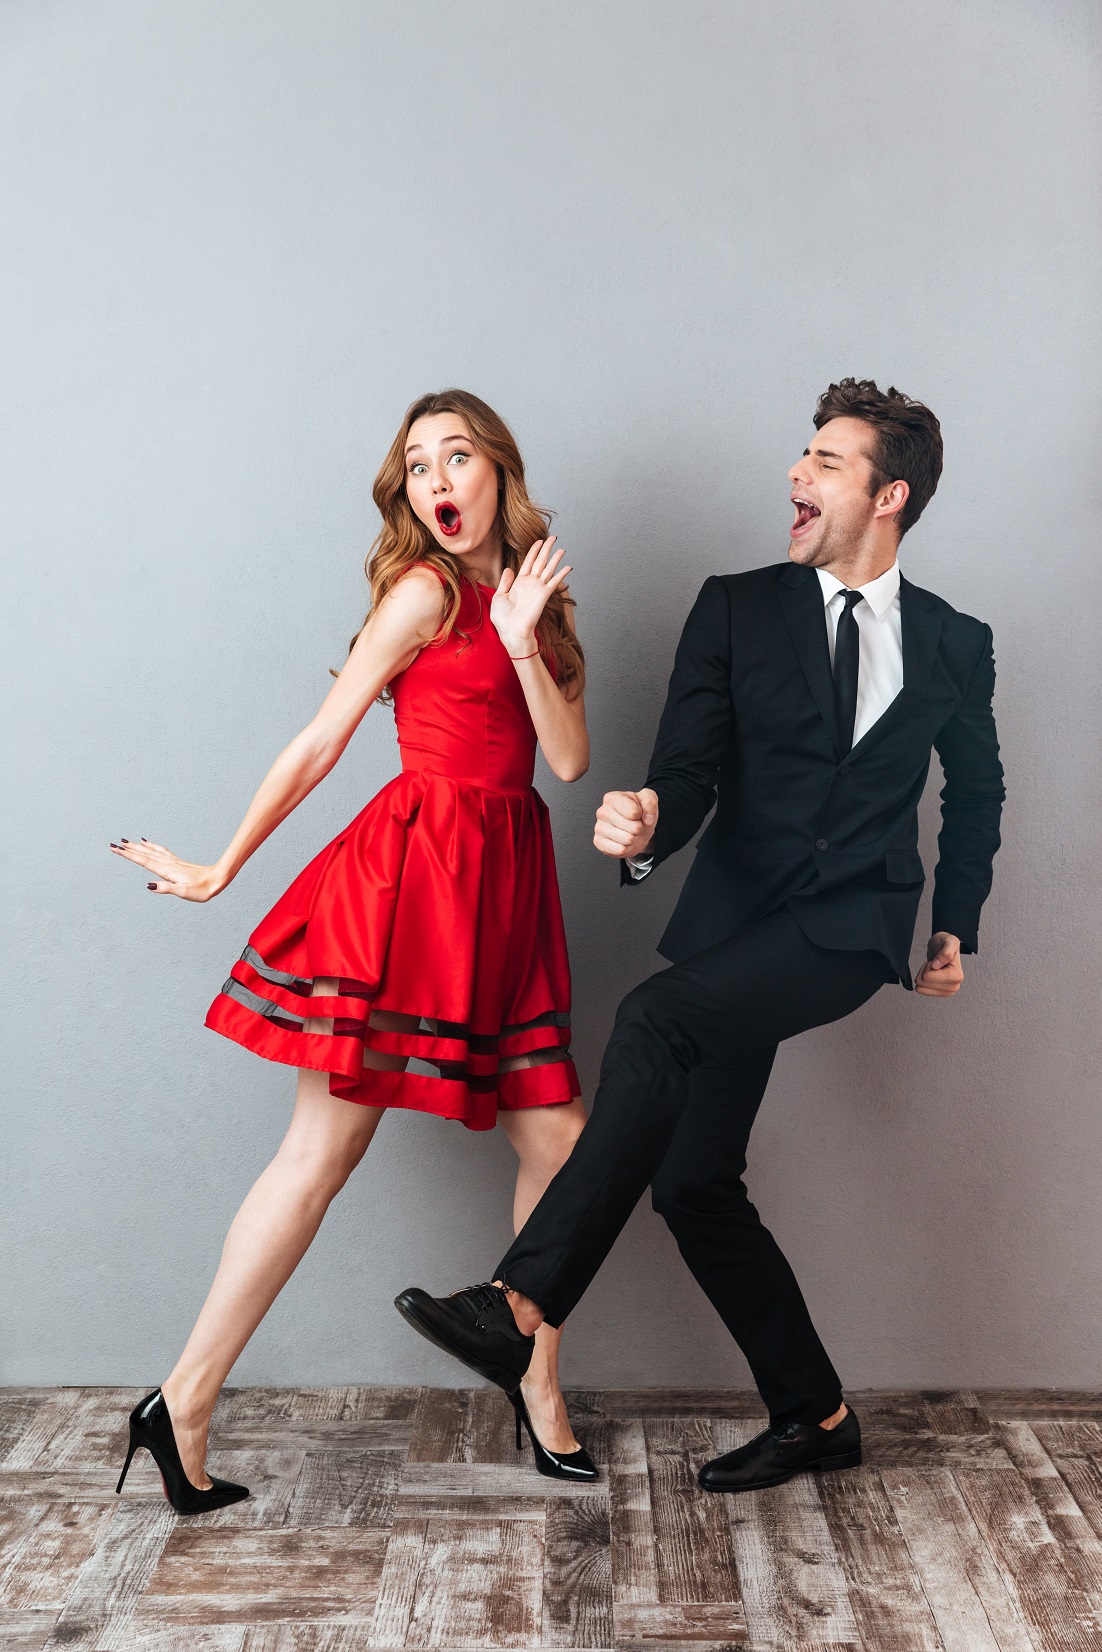 Full,Length,Portrait,Of,A,Happy,Excited,Couple,Dressed,In